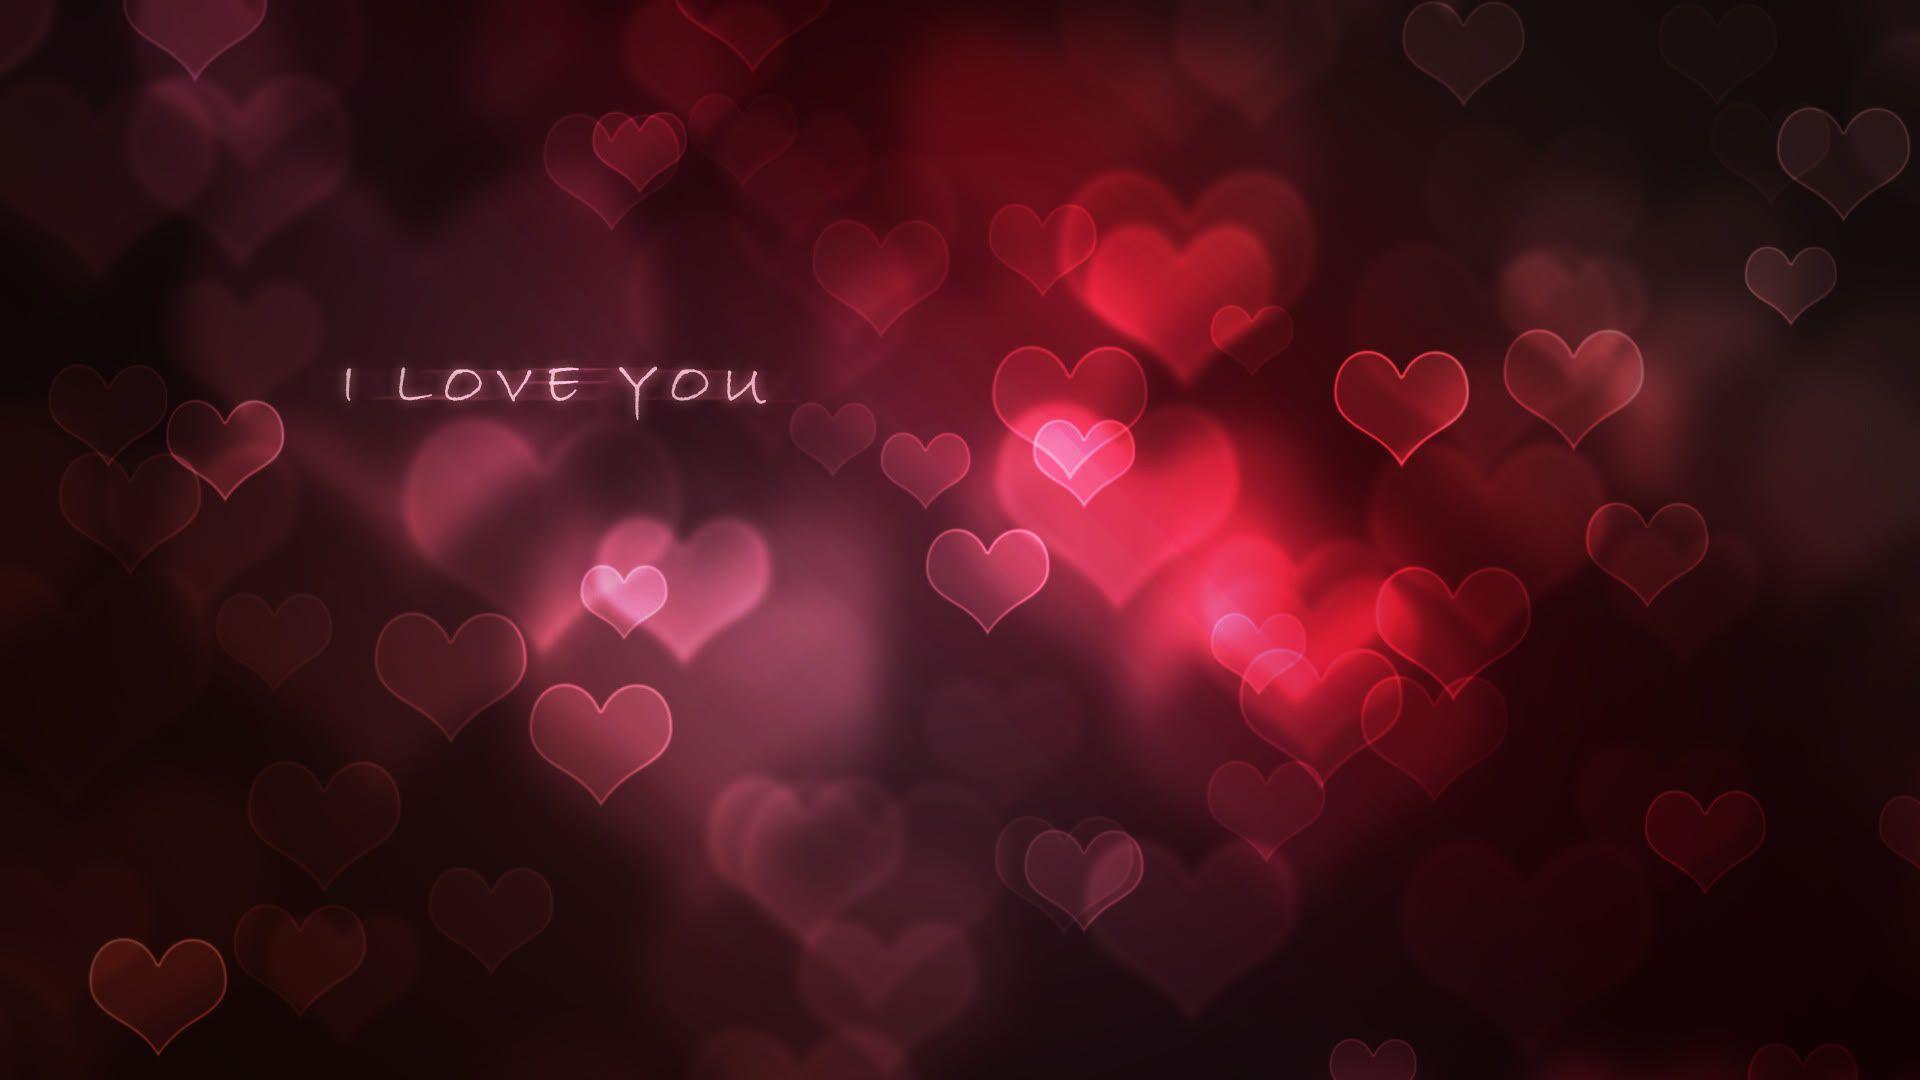 love wallpaper. To share on facebook, orkut, Myspace or to